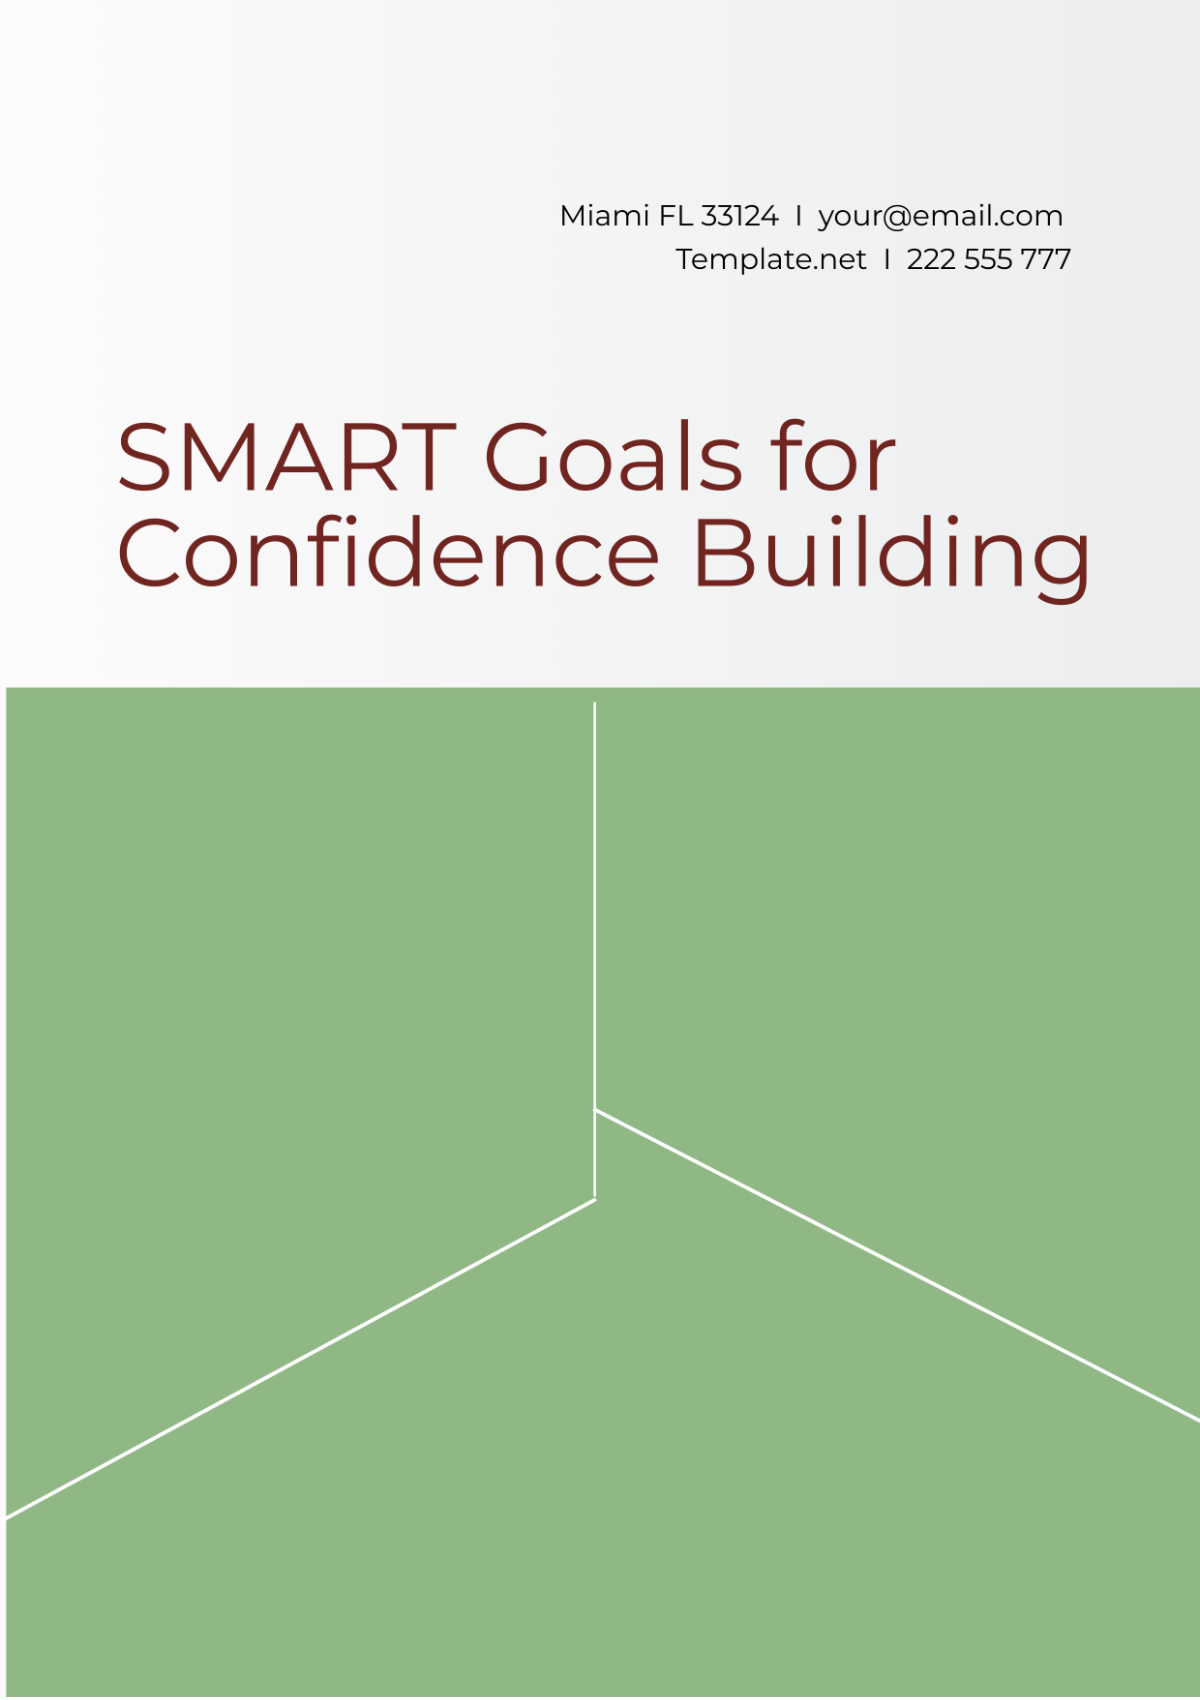 SMART Goals Template for Confidence Building